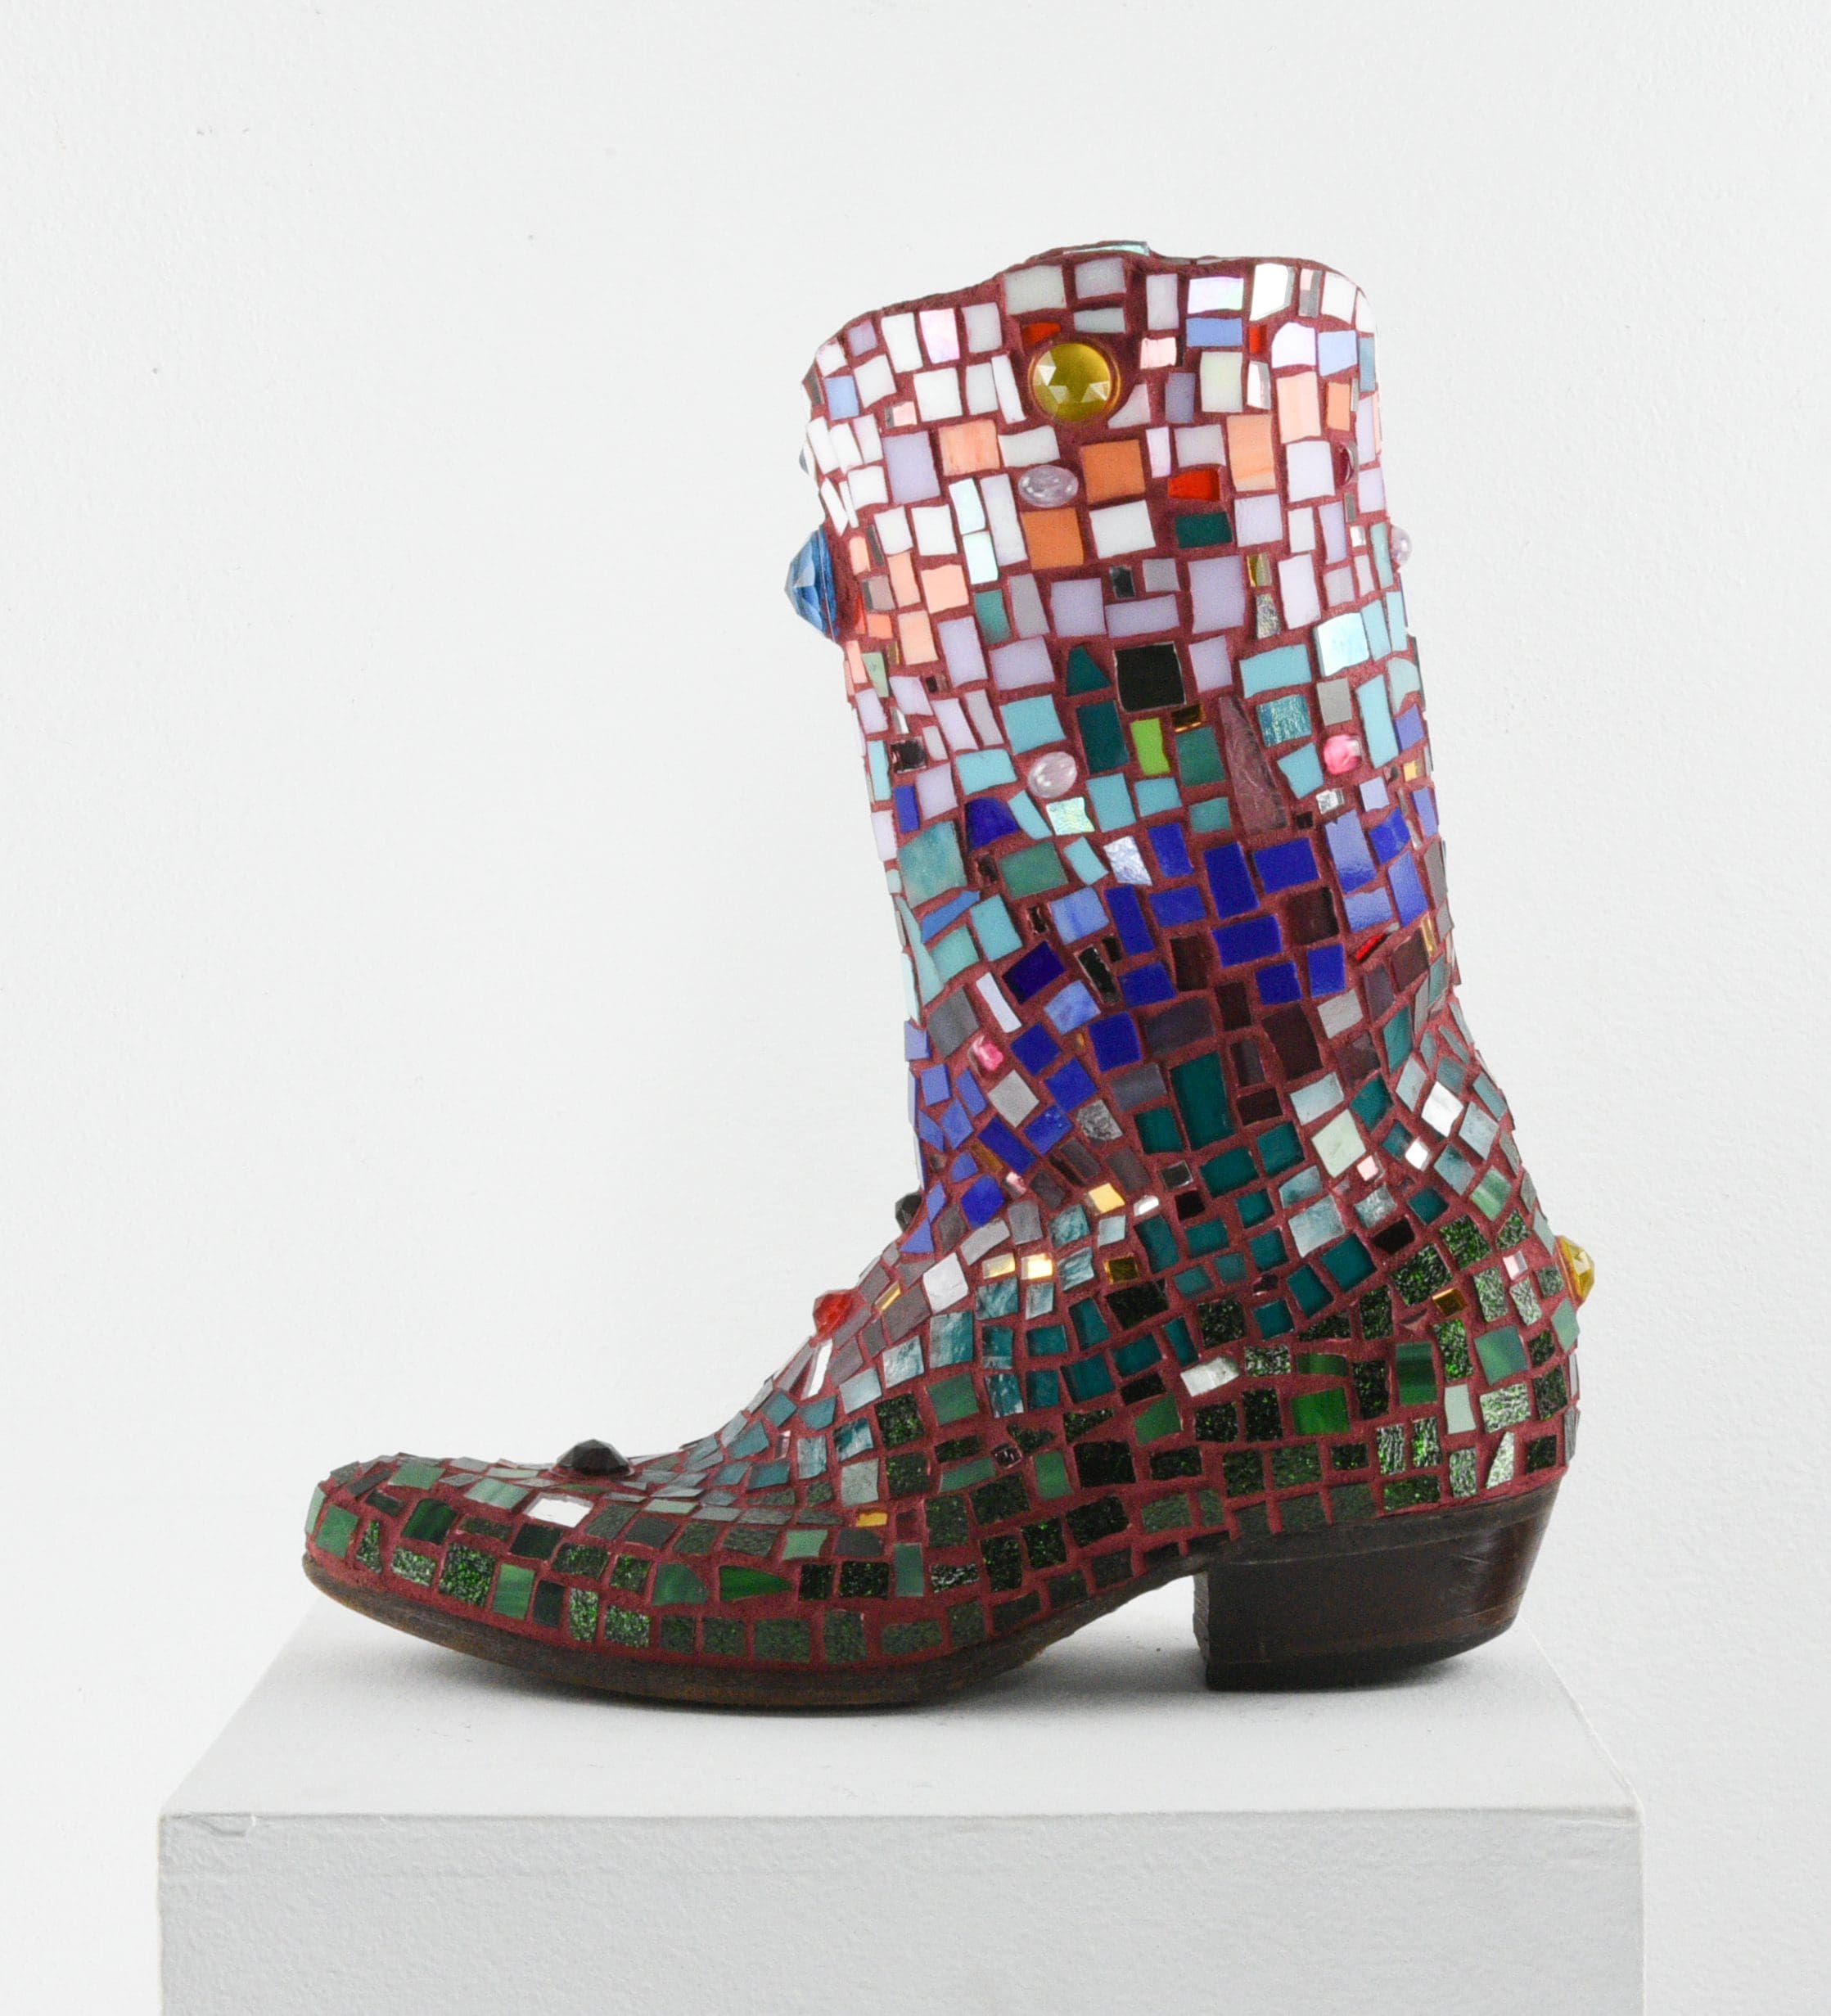 Cowboy boot covered in multi colored mosaic tiles